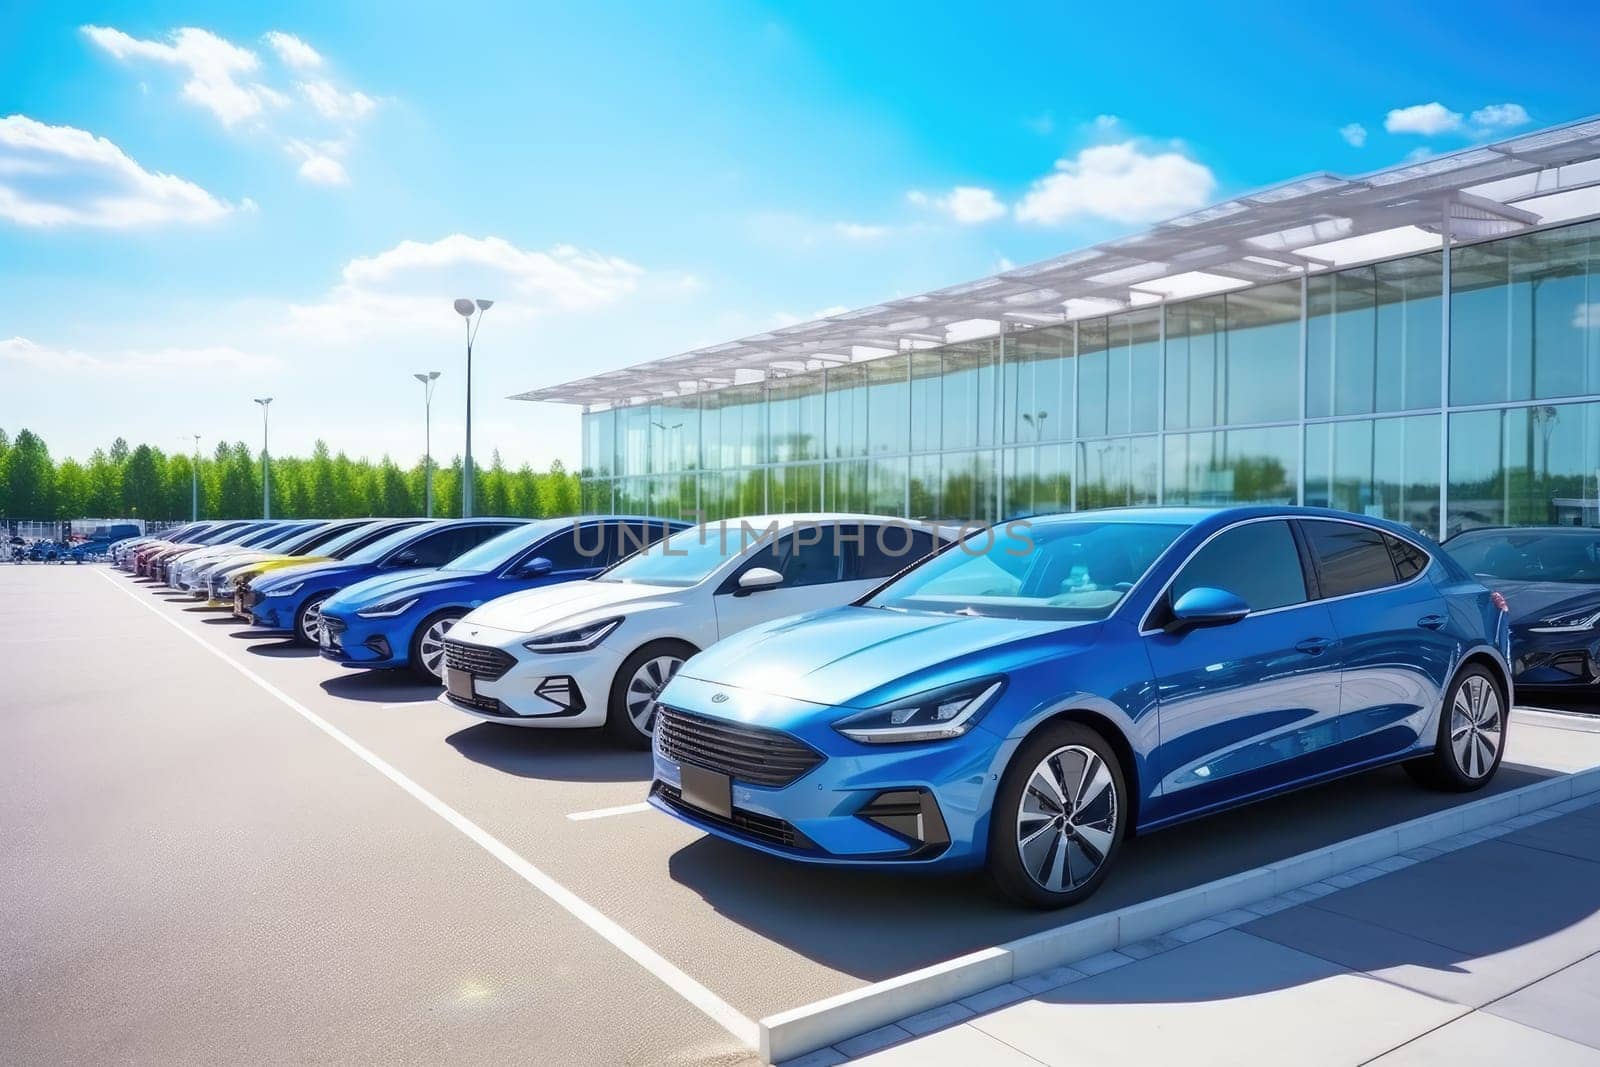 A diverse collection of electric cars parked in a large parking area, showcasing the trend toward sustainable and eco-friendly transportation options.